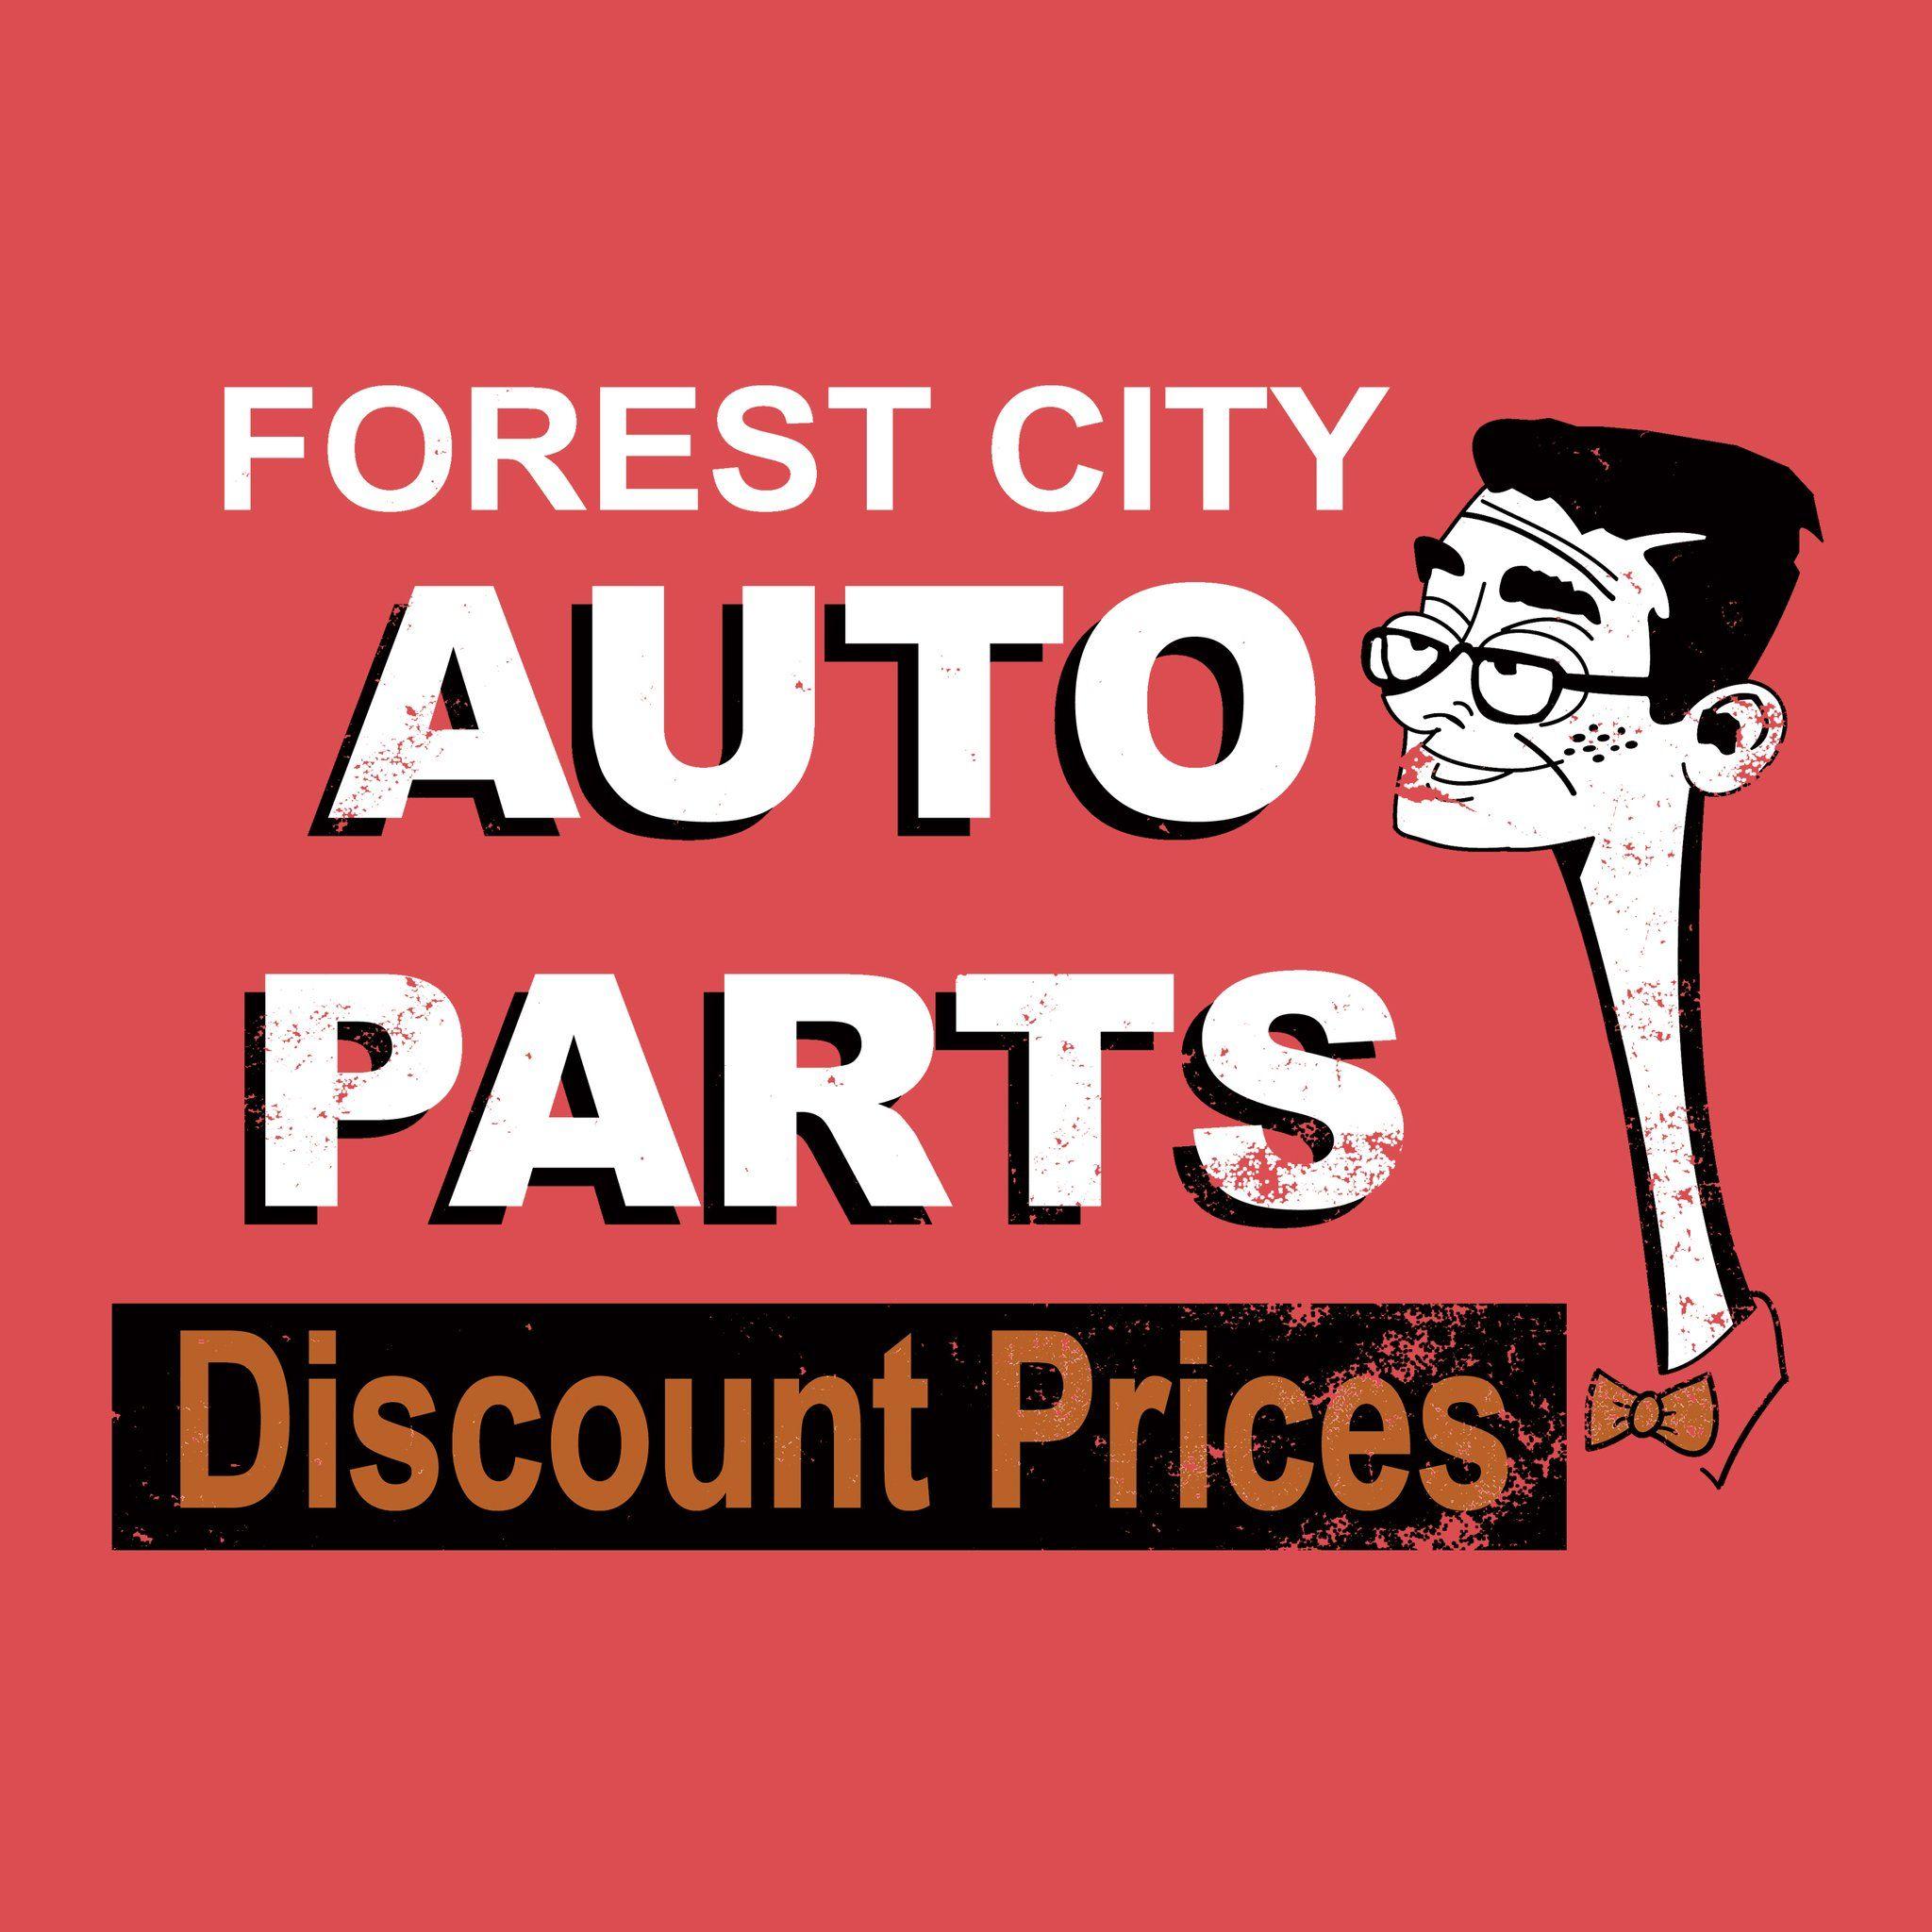 Auto Products Logo - Forest City Auto Parts. Cleveland Vintage Apparel. Old School